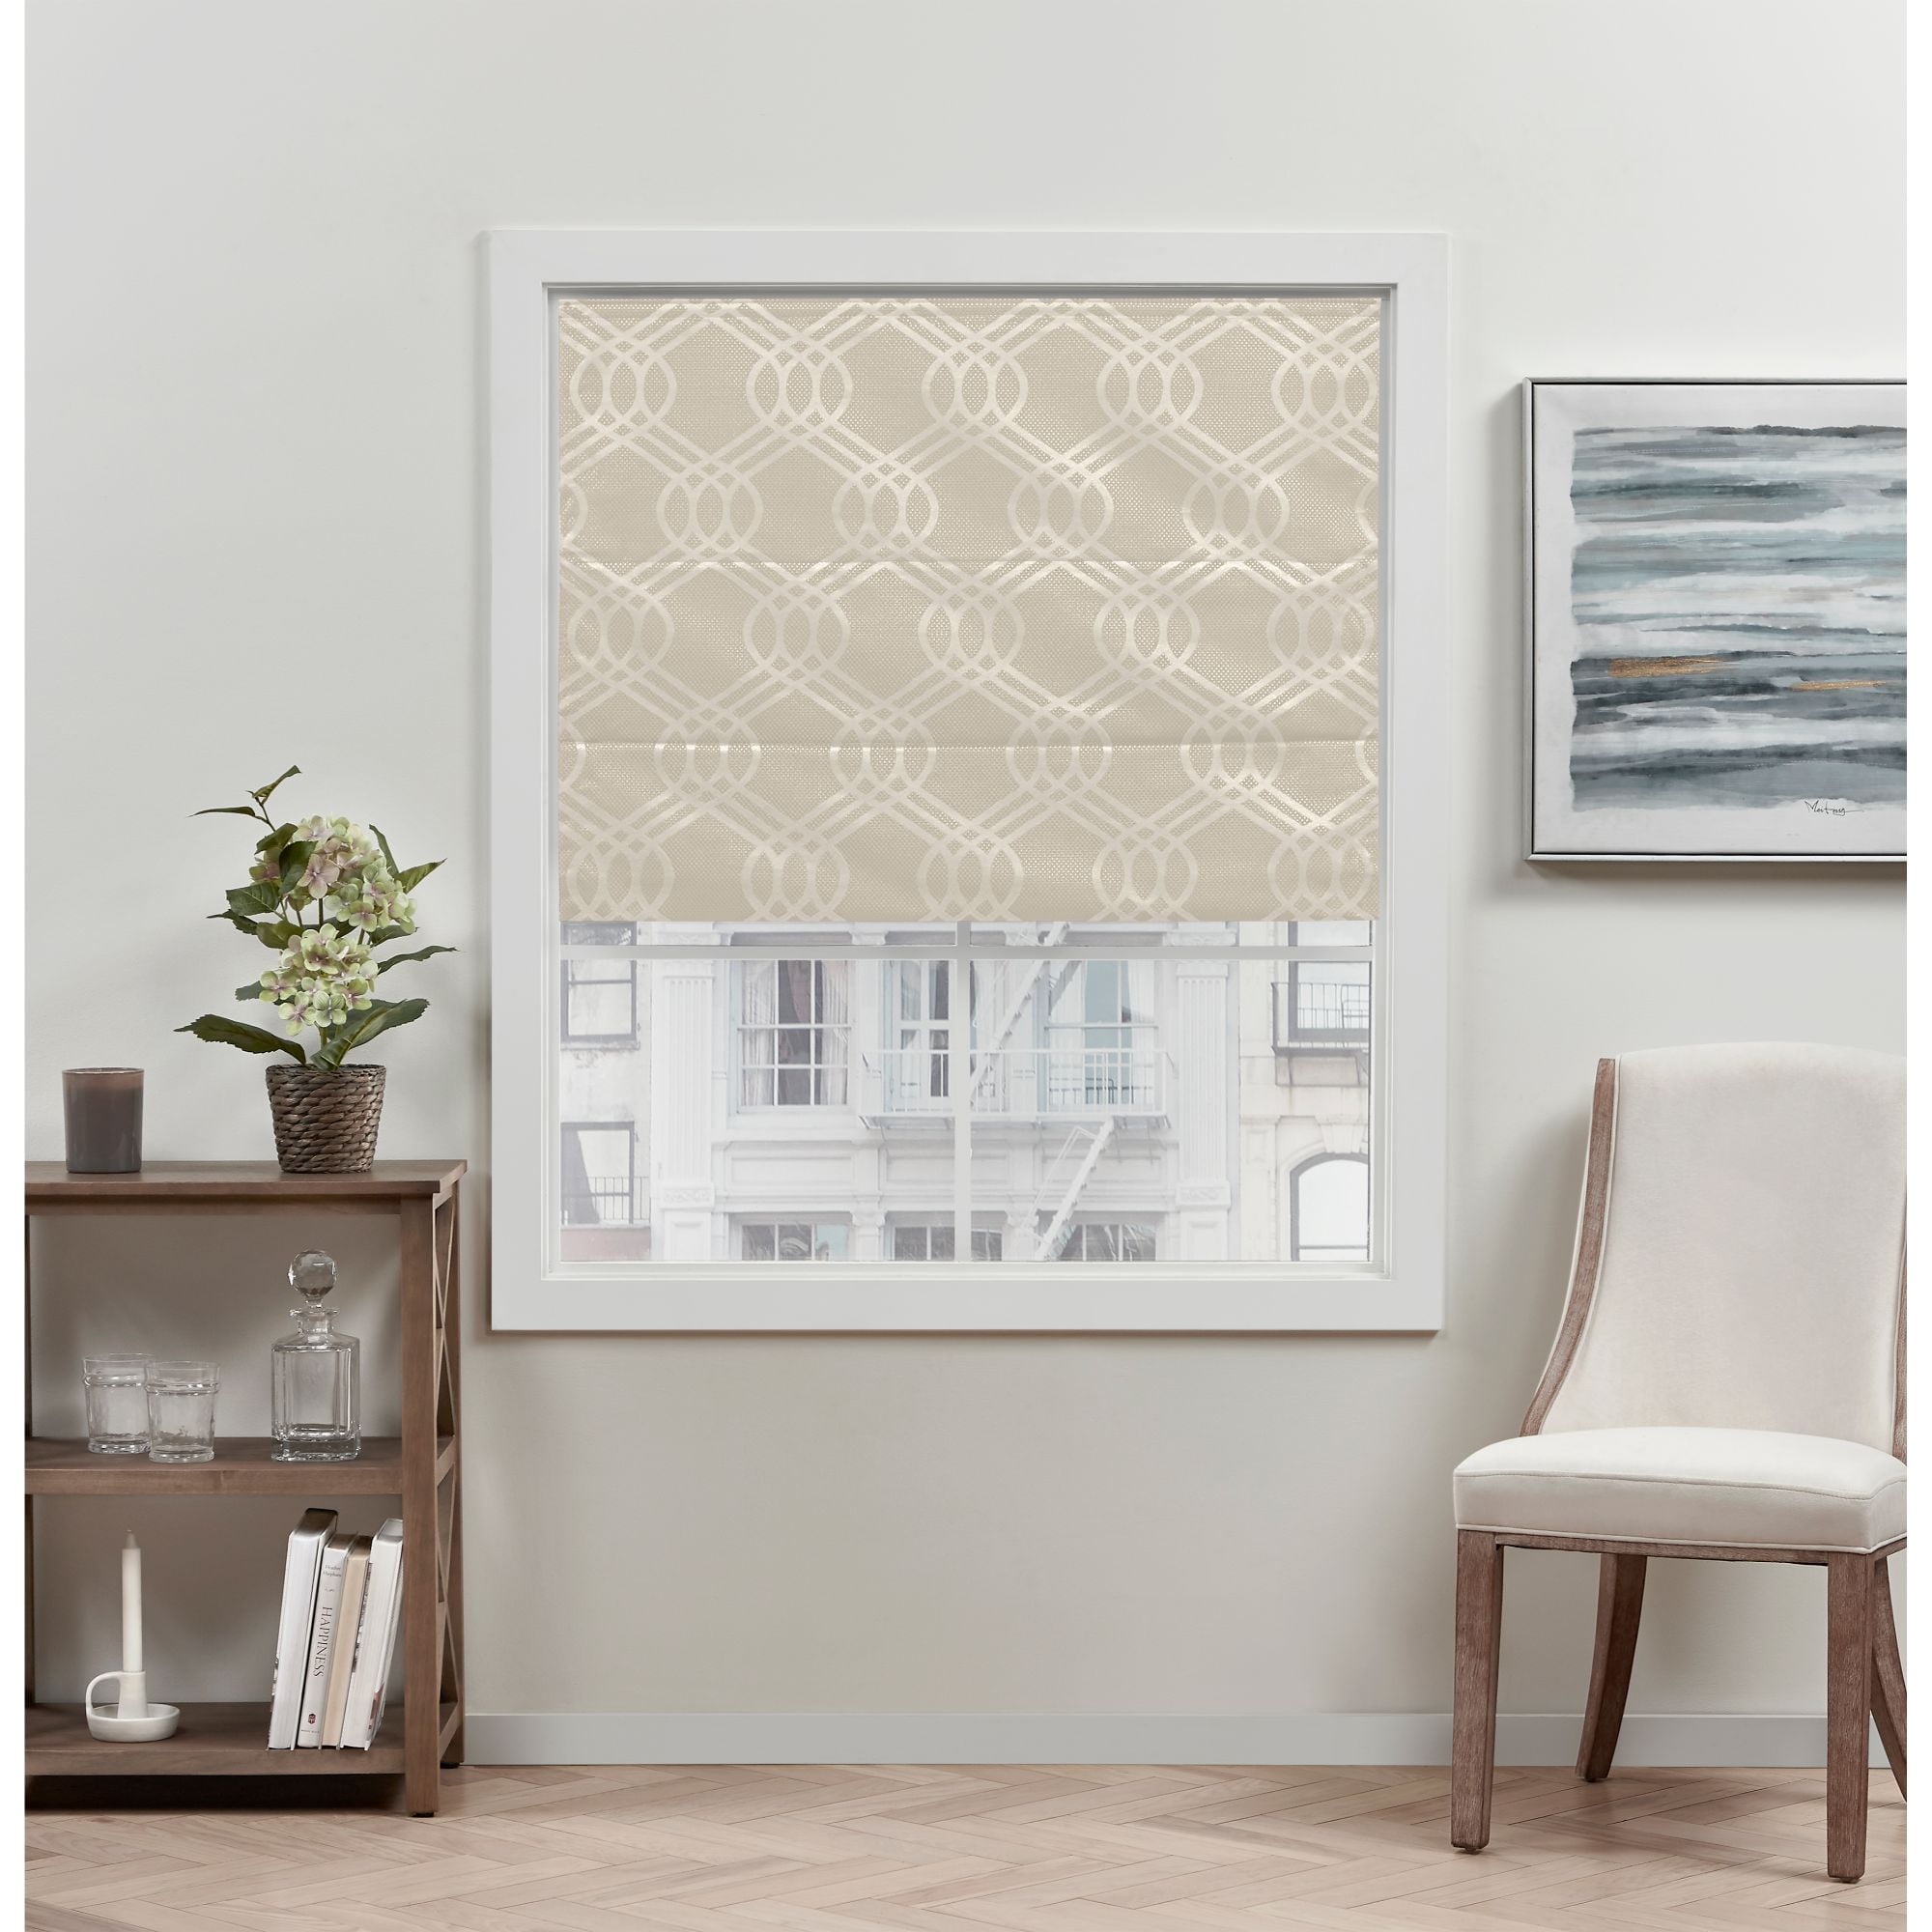 Window Roller Blind Curtain Blackout Fabric Shades Diamante Border Natural New 